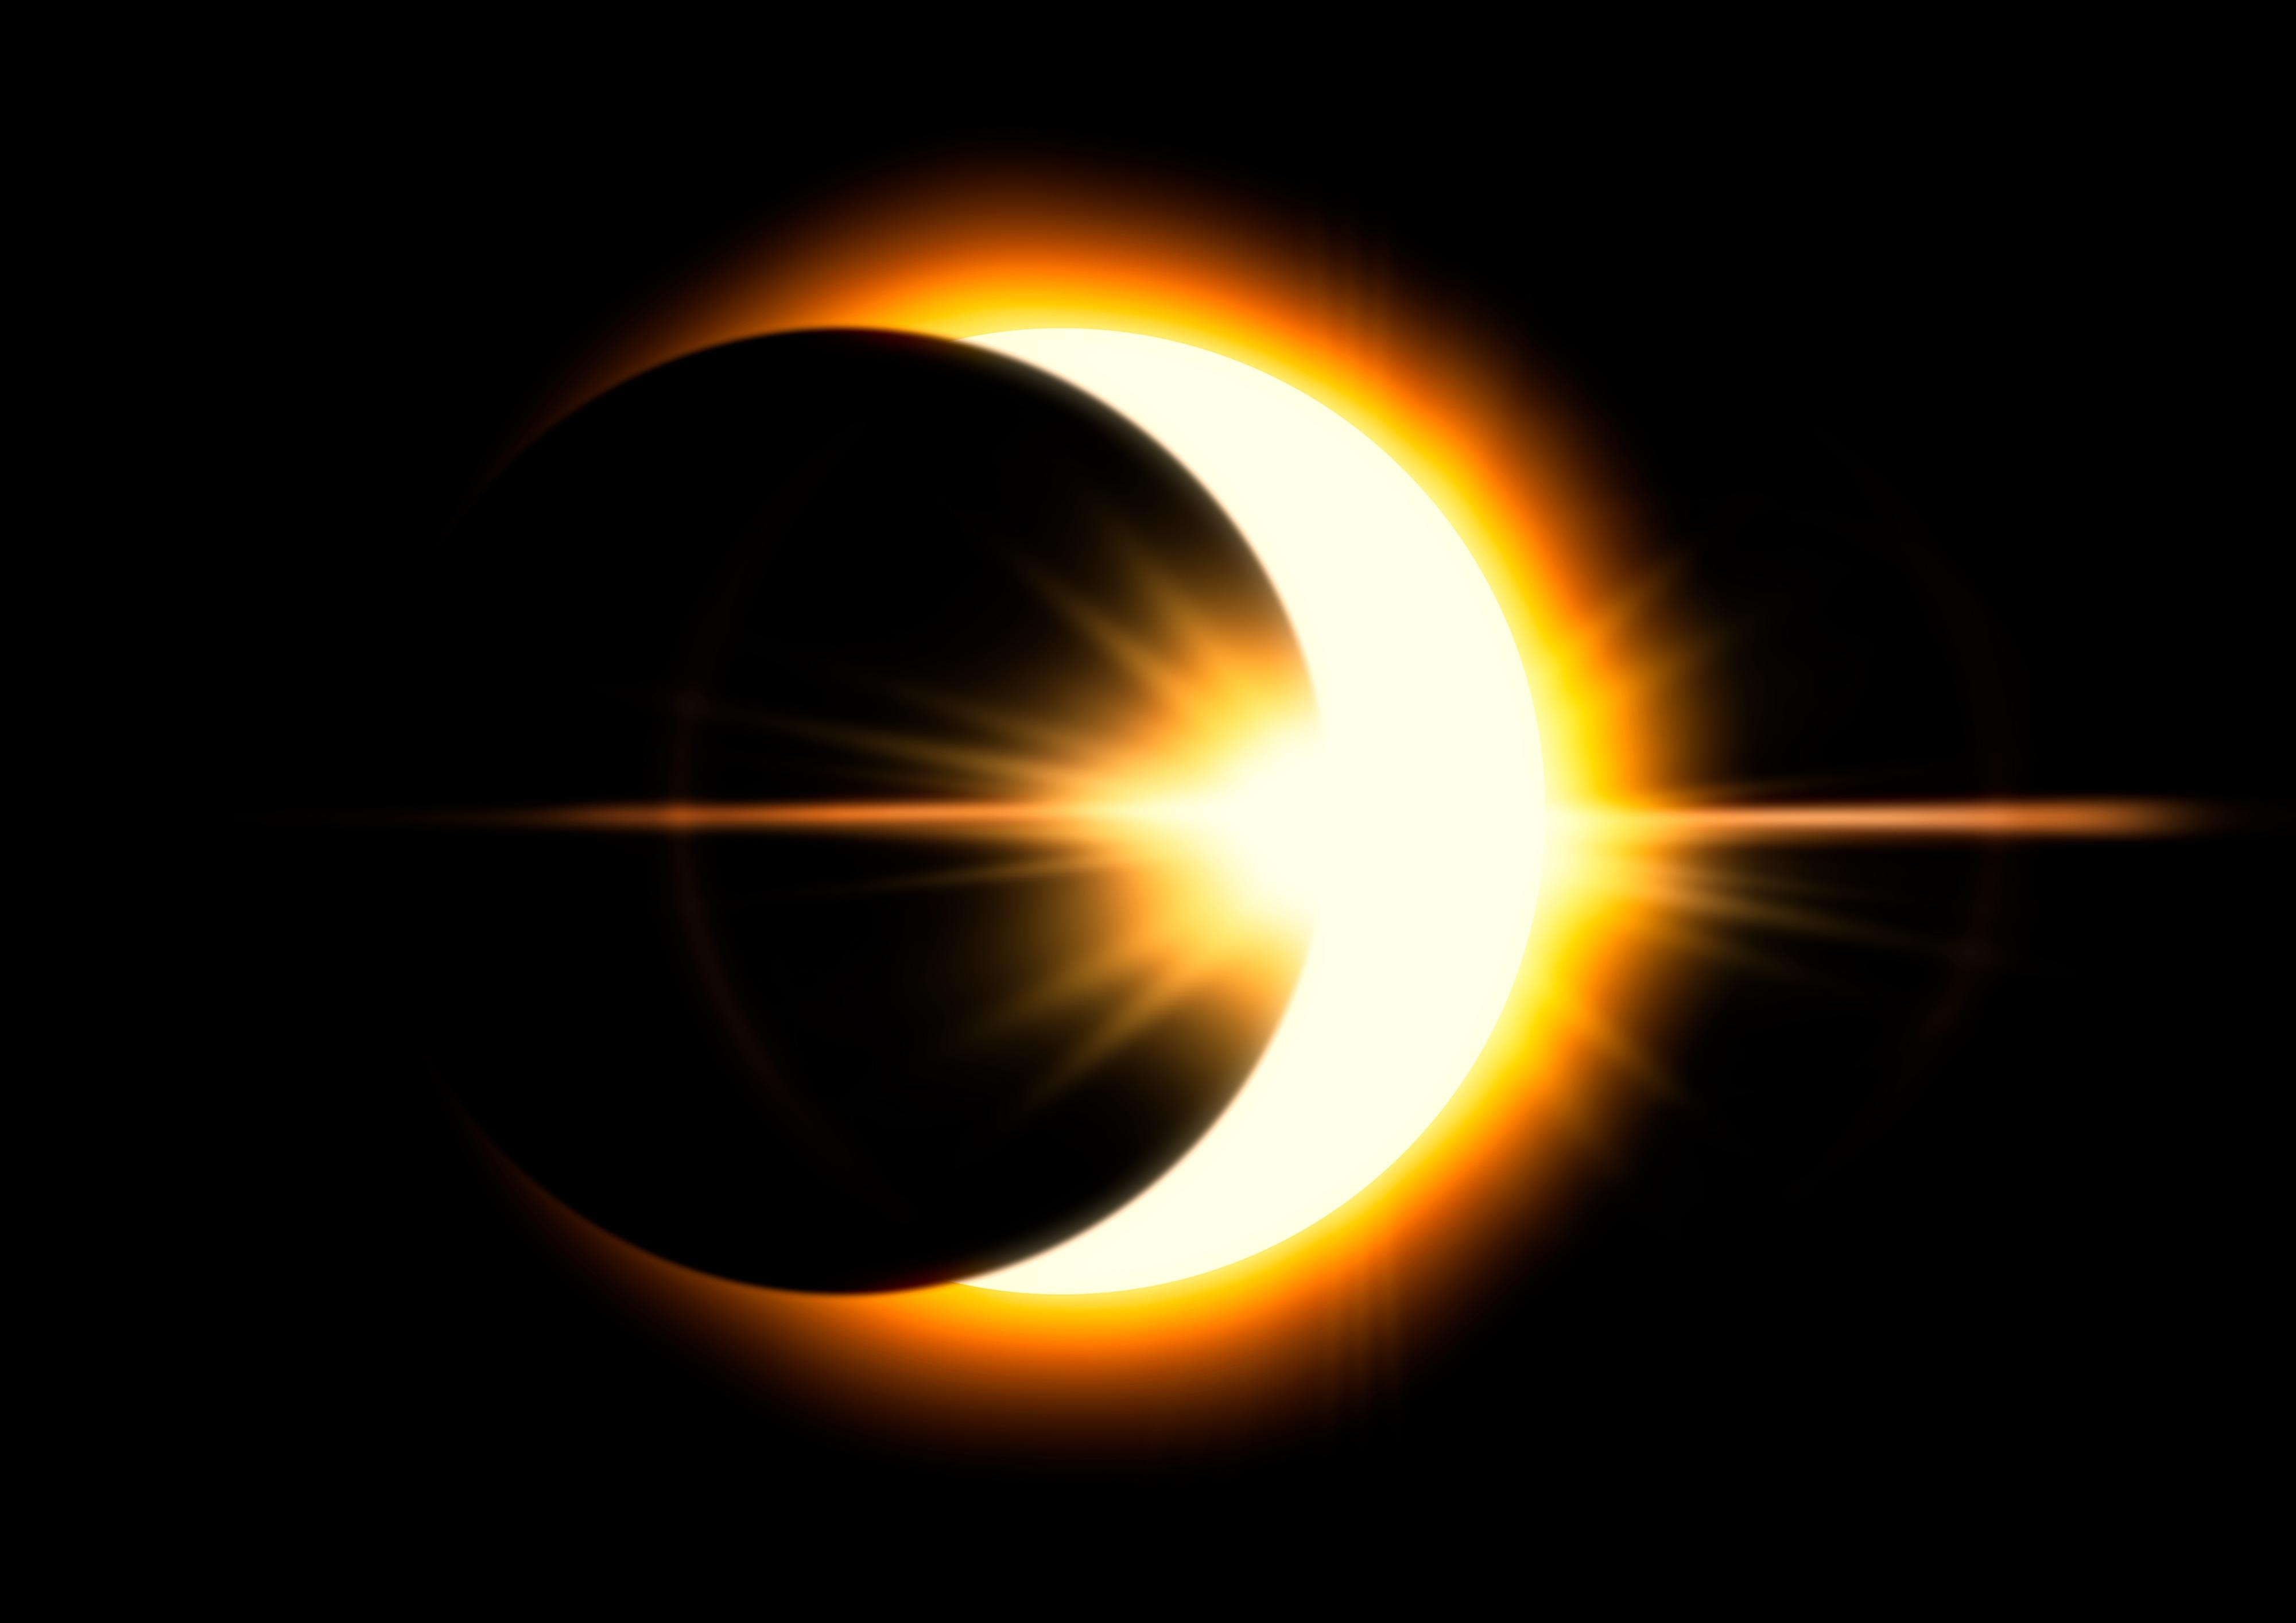 Hybrid solar eclipse, date of April 20, 2023: What it is and how to see it